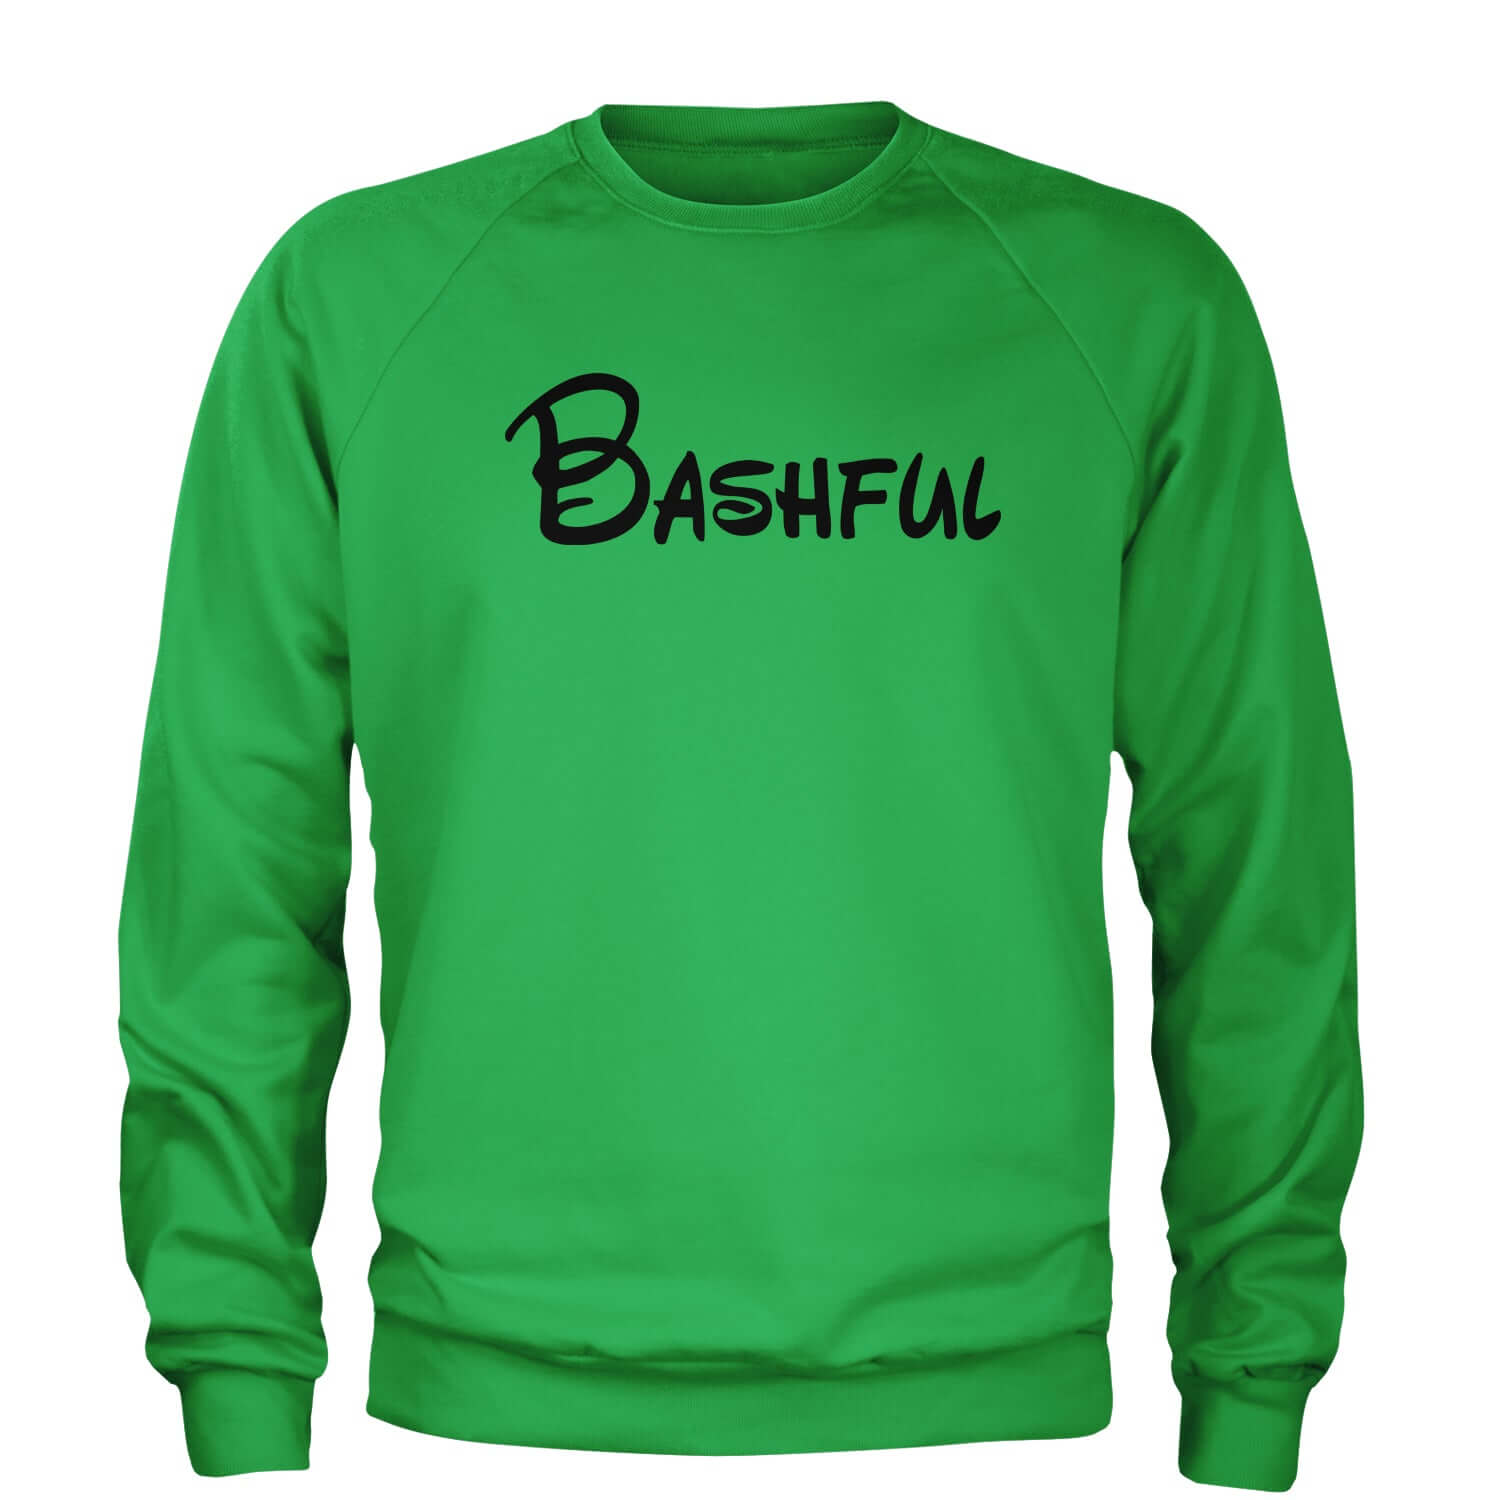 Bashful - 7 Dwarfs Costume Adult Crewneck Sweatshirt and, costume, dwarfs, group, halloween, matching, seven, snow, the, white by Expression Tees